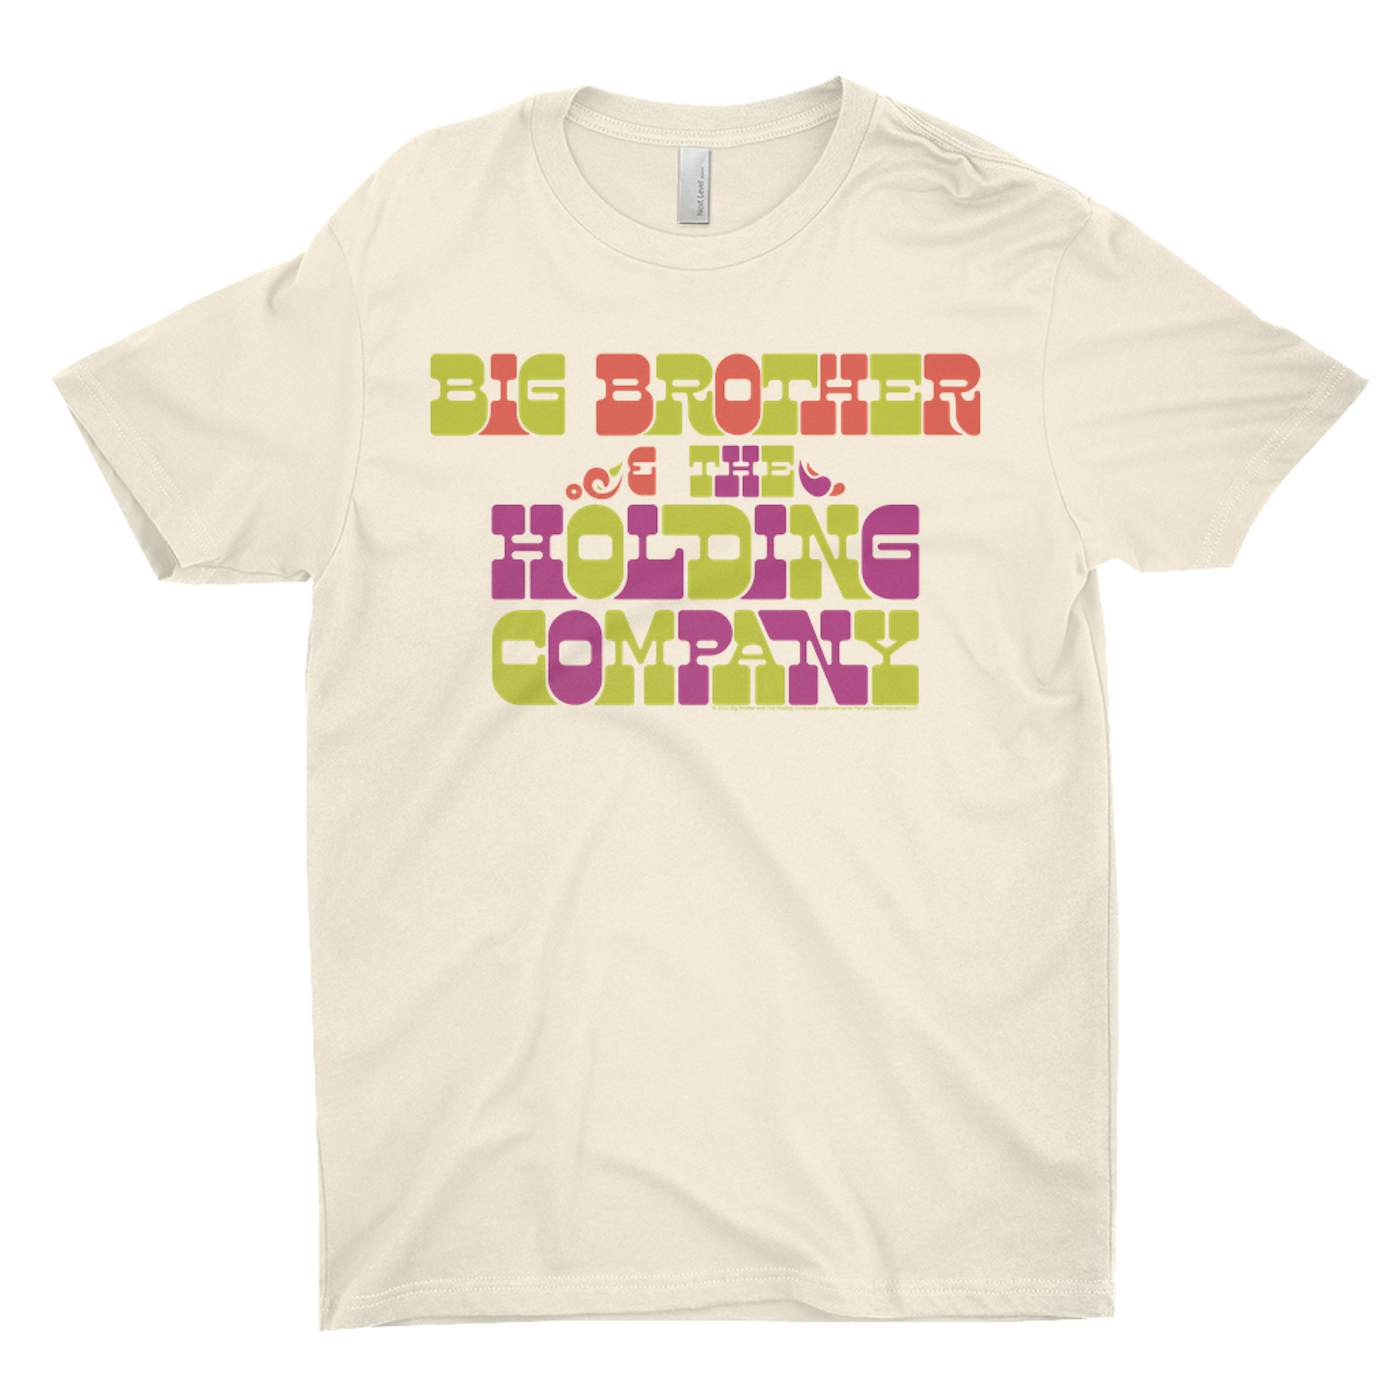 Big Brother & The Holding Company Big Brother and The Holding Co. T-Shirt | BBHC Retro Logo Big Brother and The Holding Co. Shirt